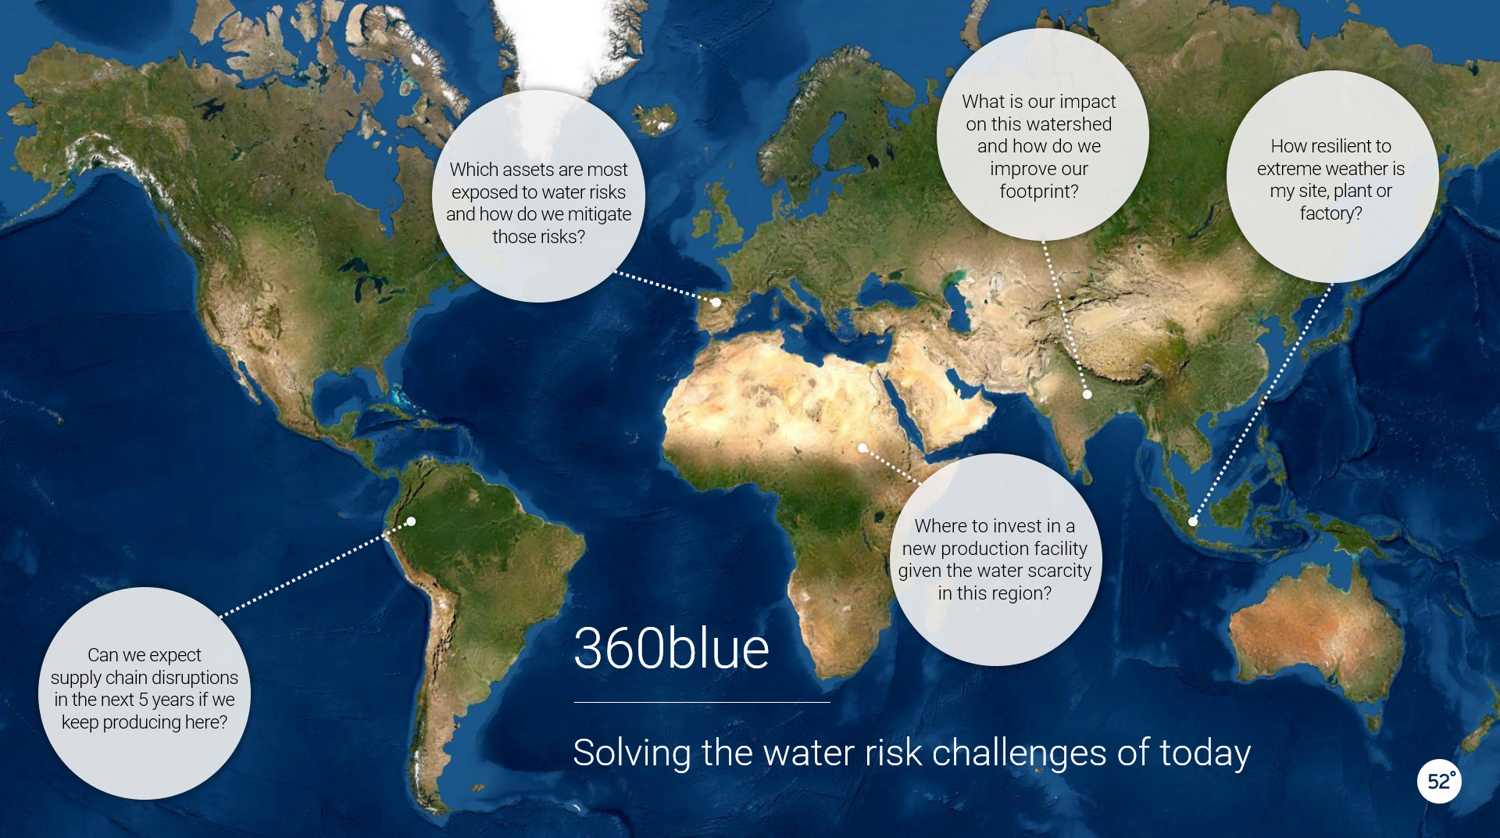 Our product 360blue for water risk assessments and mitigation